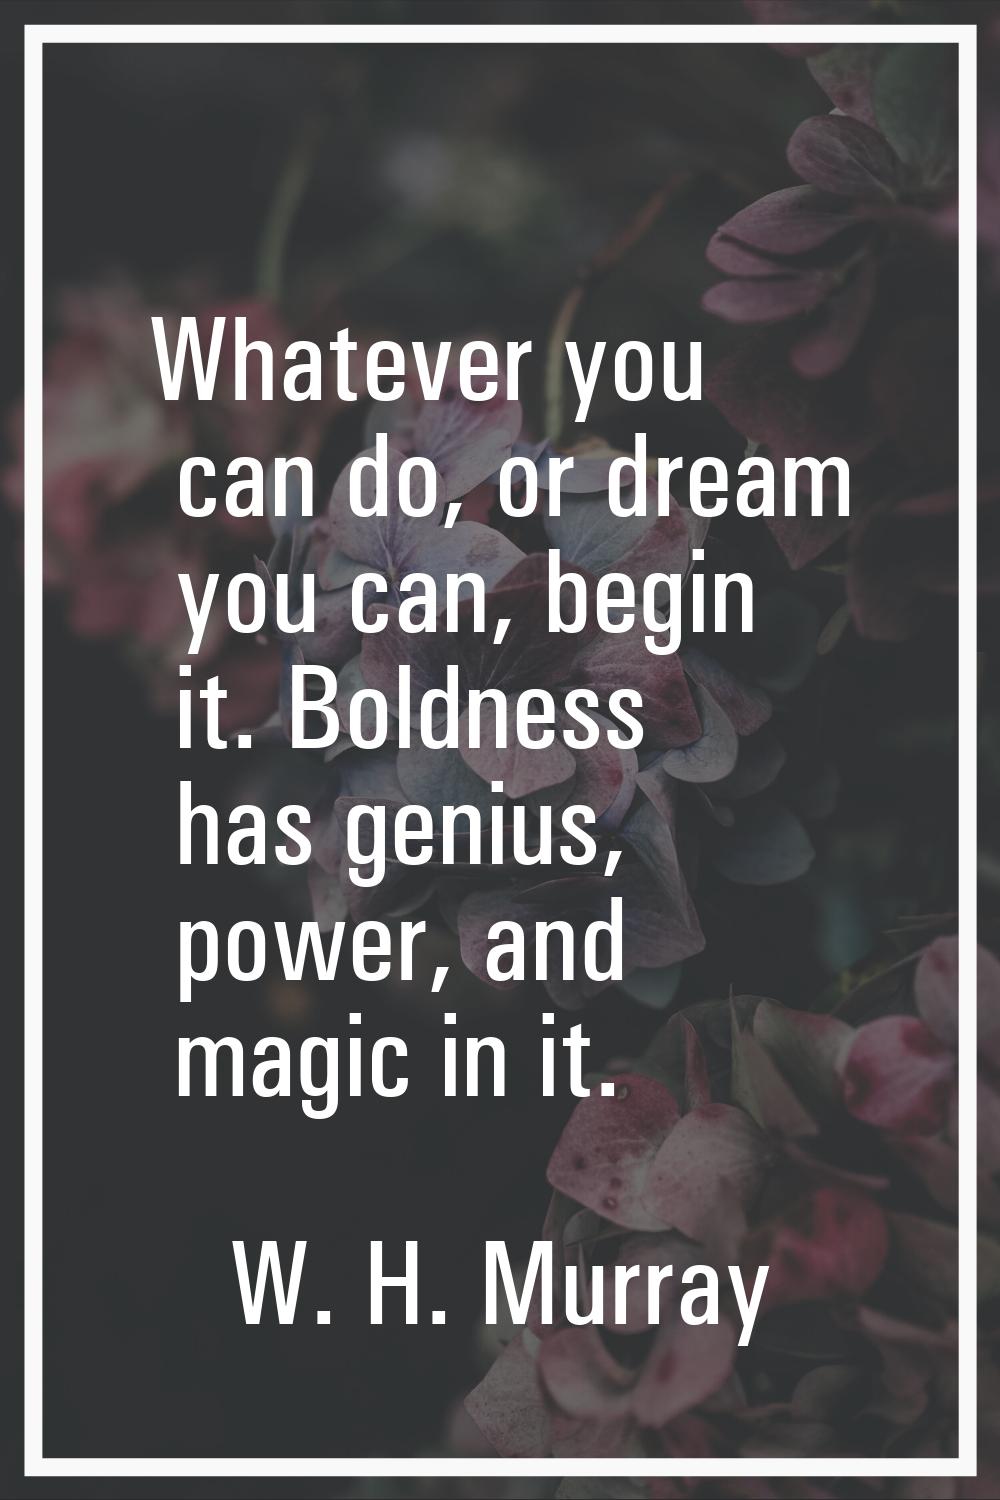 Whatever you can do, or dream you can, begin it. Boldness has genius, power, and magic in it.